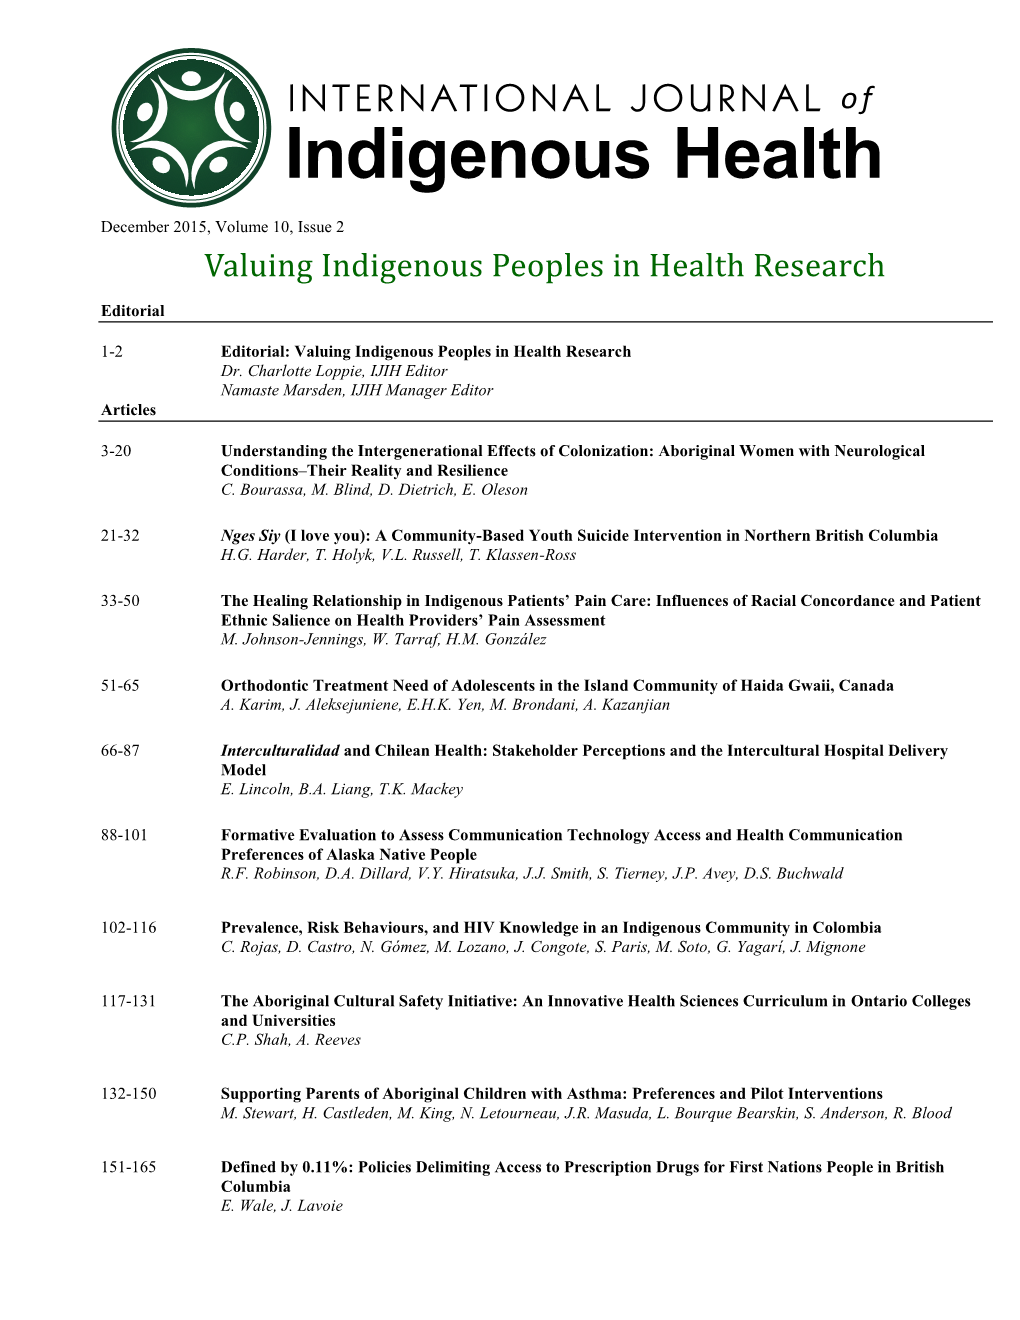 Valuing Indigenous Peoples in Health Research